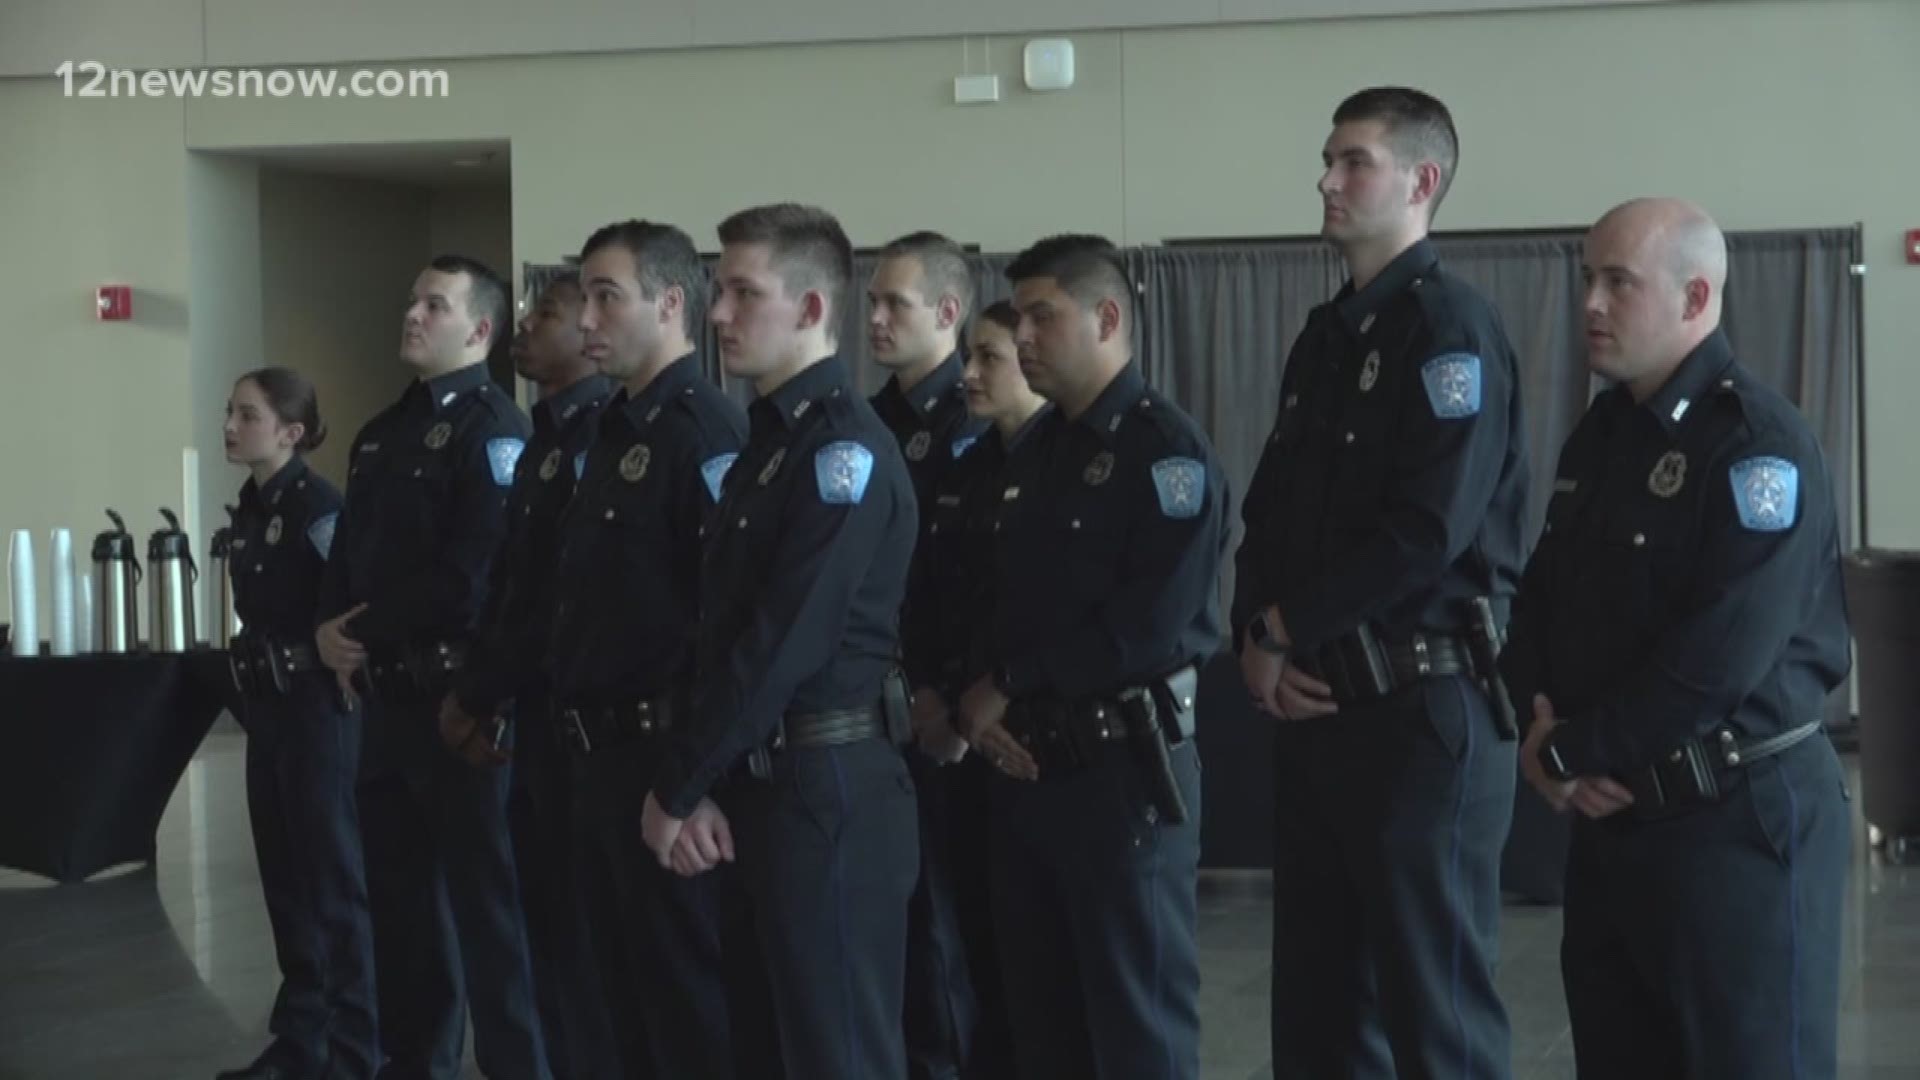 Beaumont Police Department Swears In New Officers